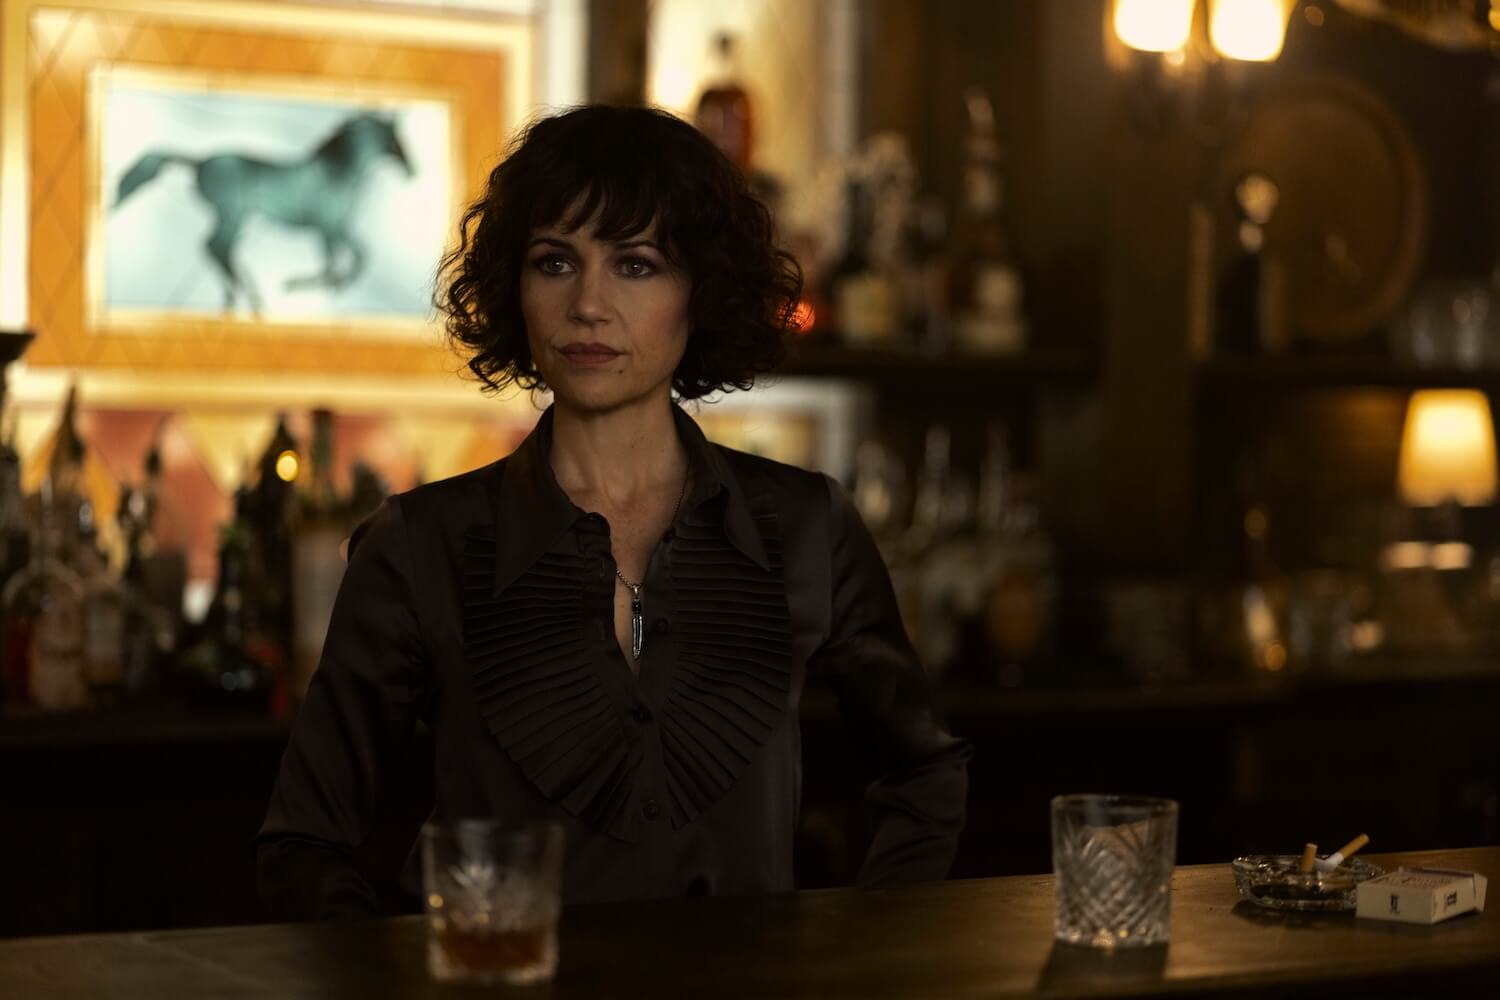 Verna standing behind a bar in a scene from The Fall of the House of Usher.